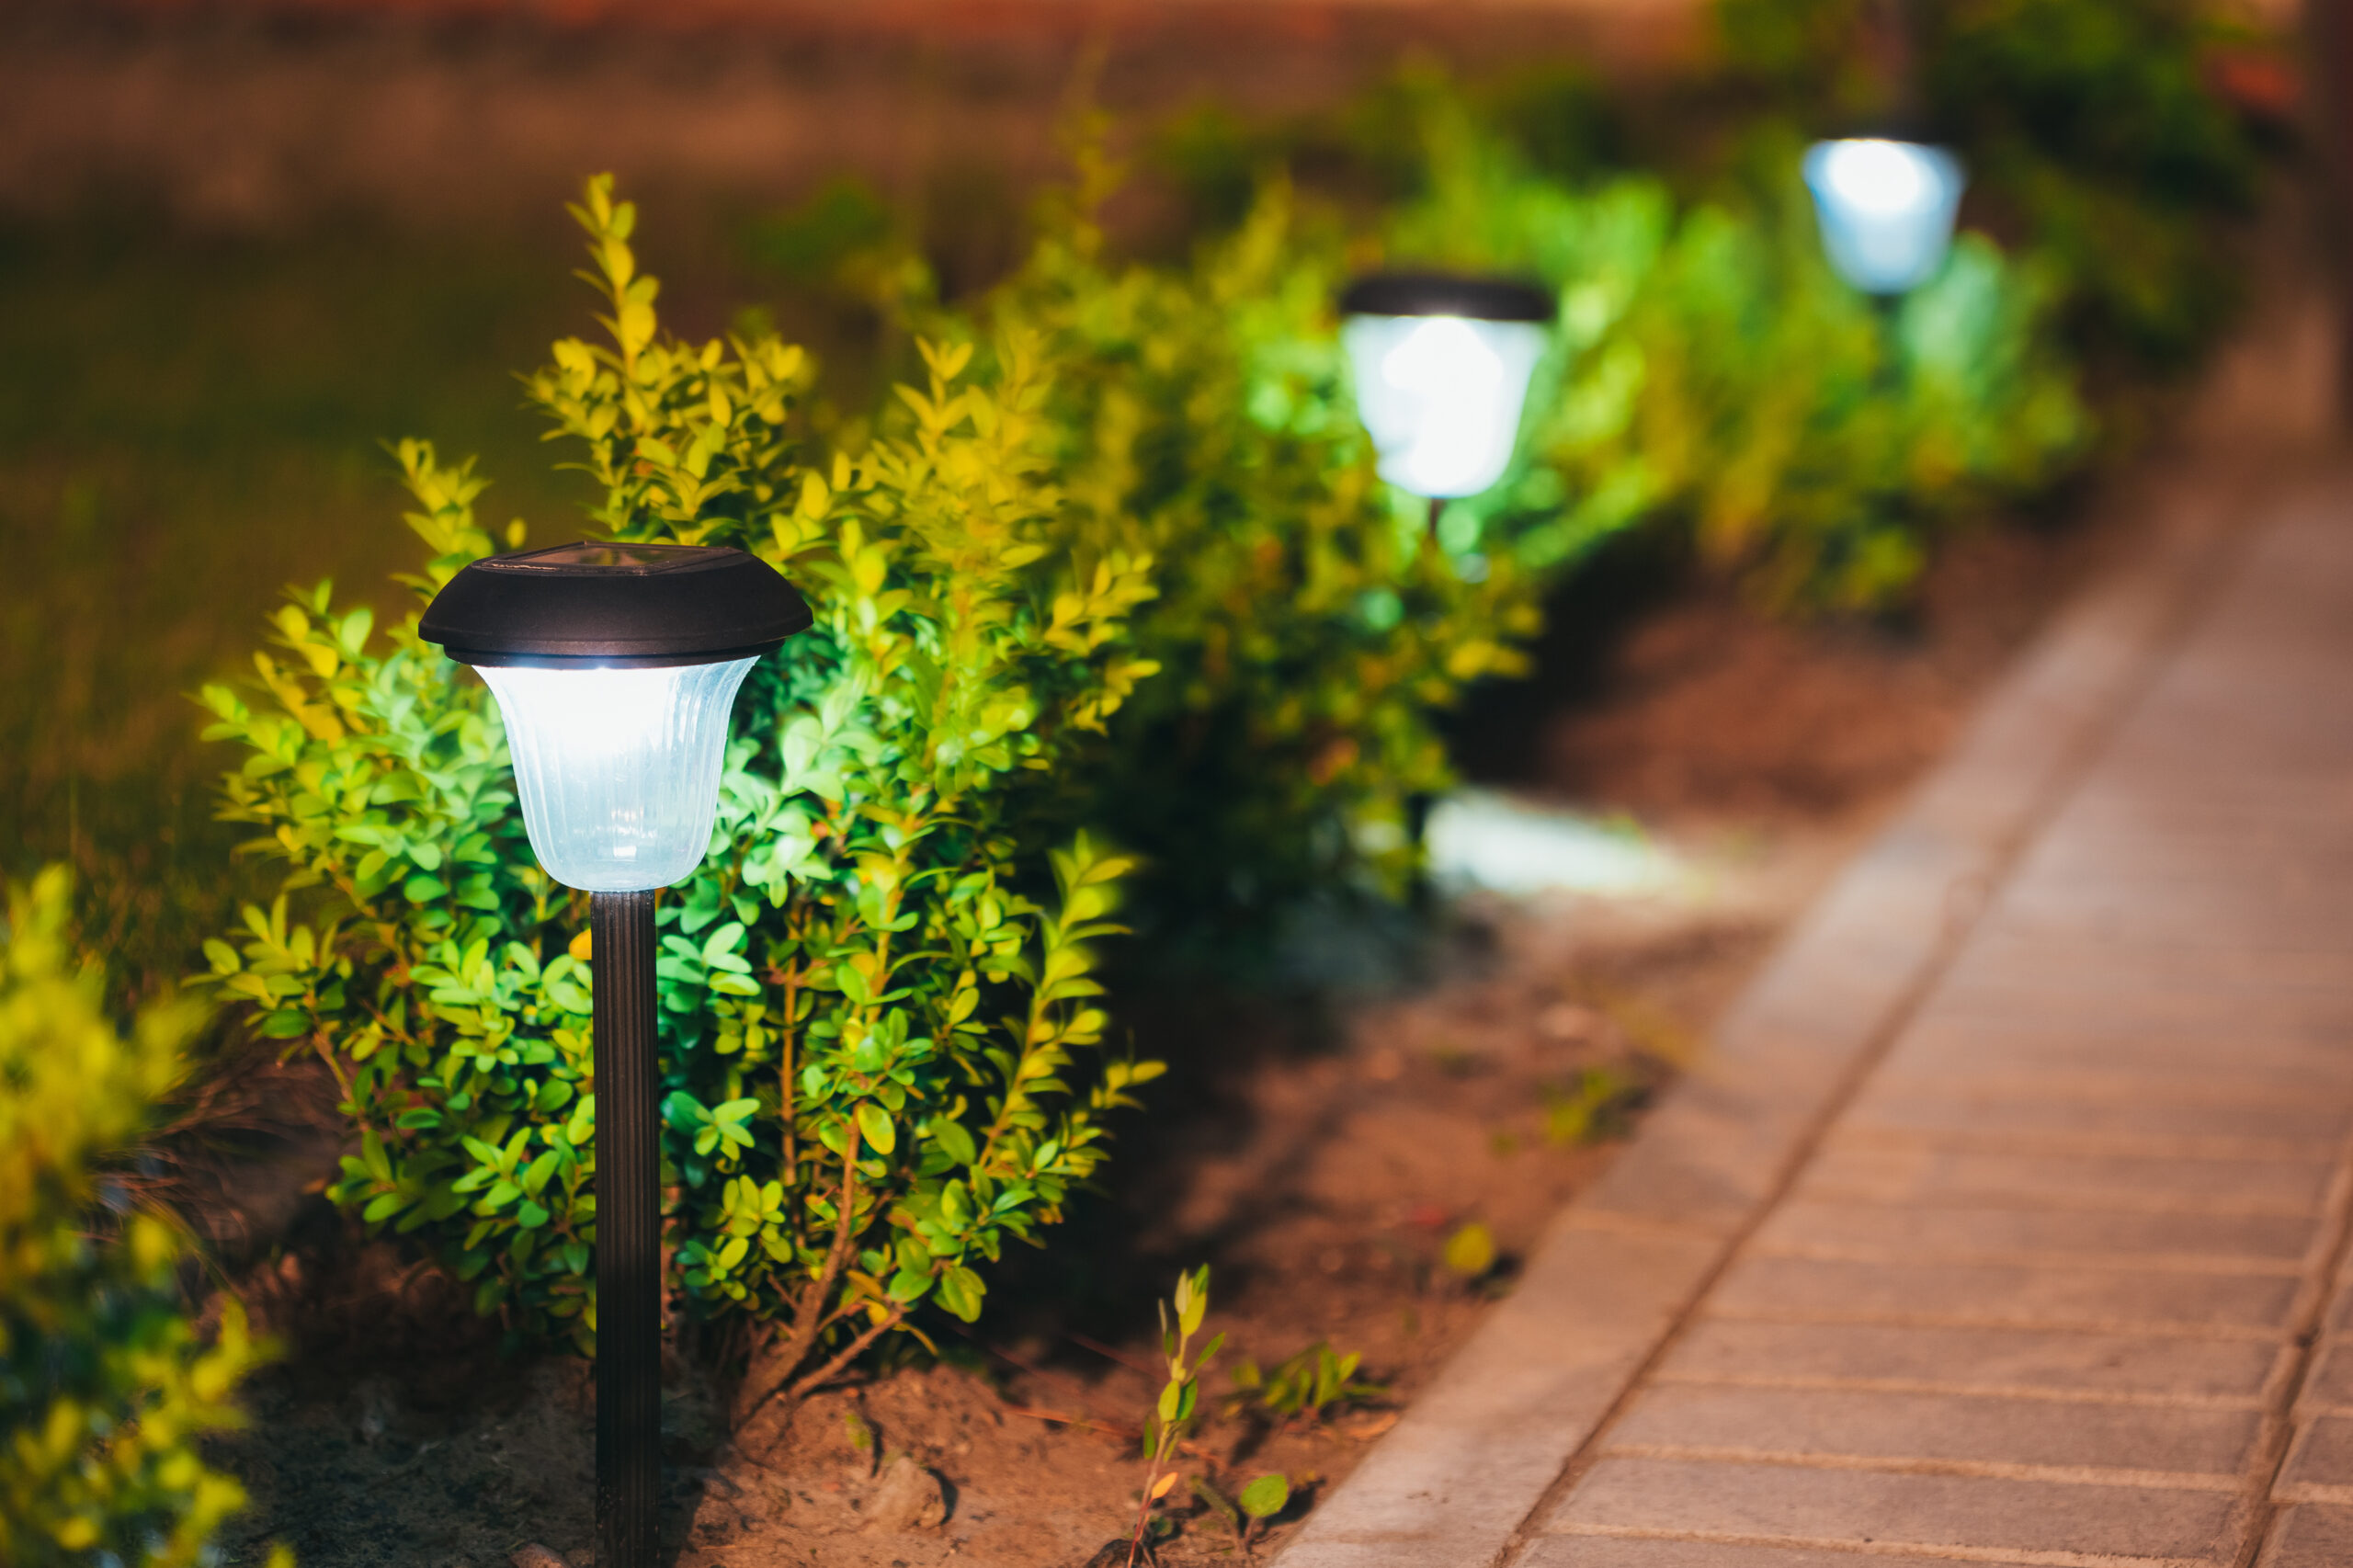 Should you install solar landscape lighting in Steamboat Springs, CO